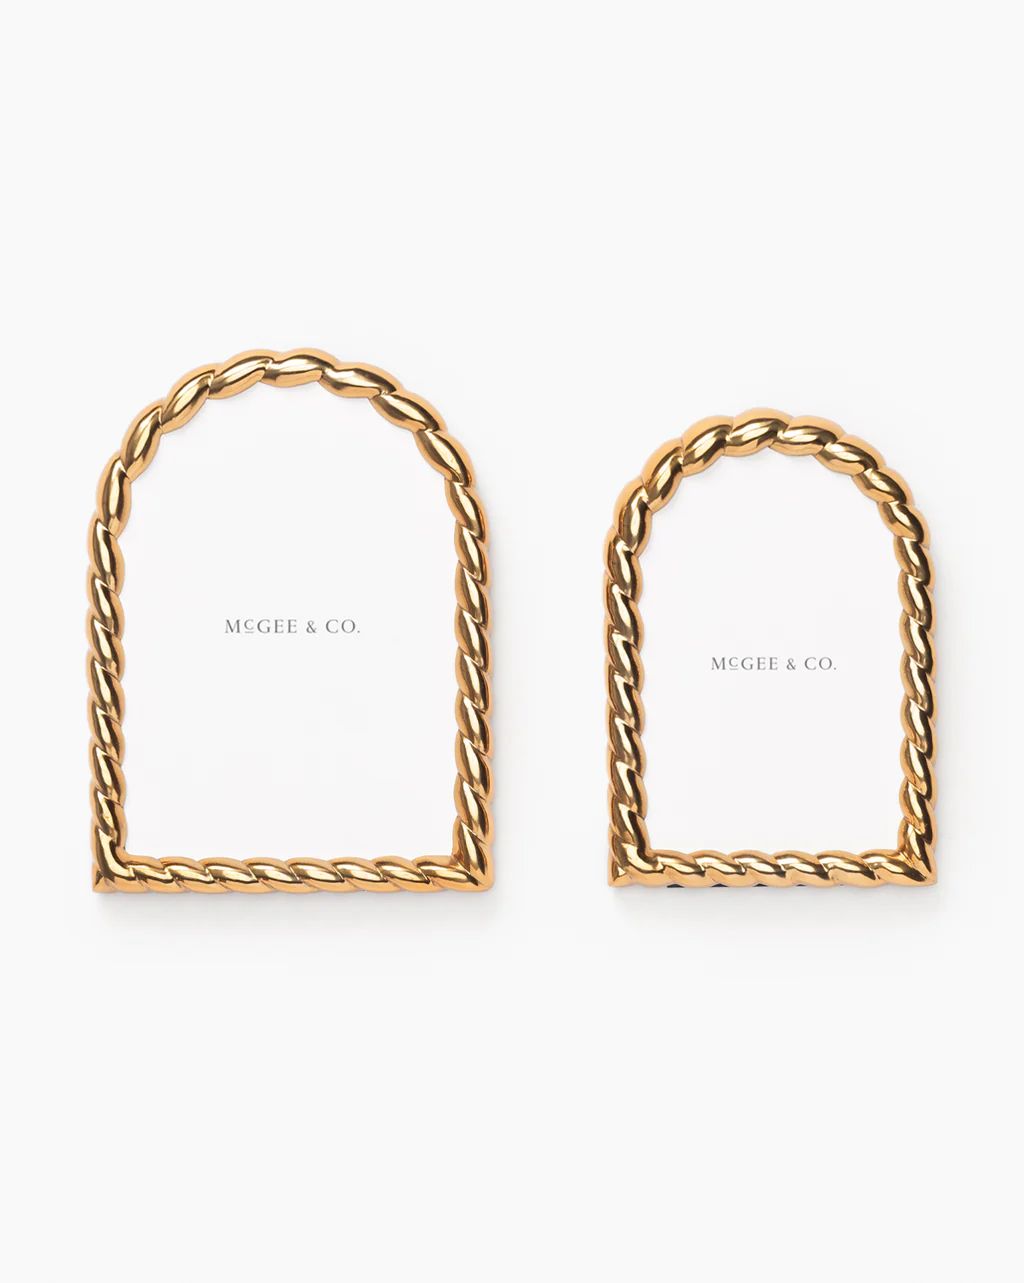 Yvette Picture Frame | McGee & Co.